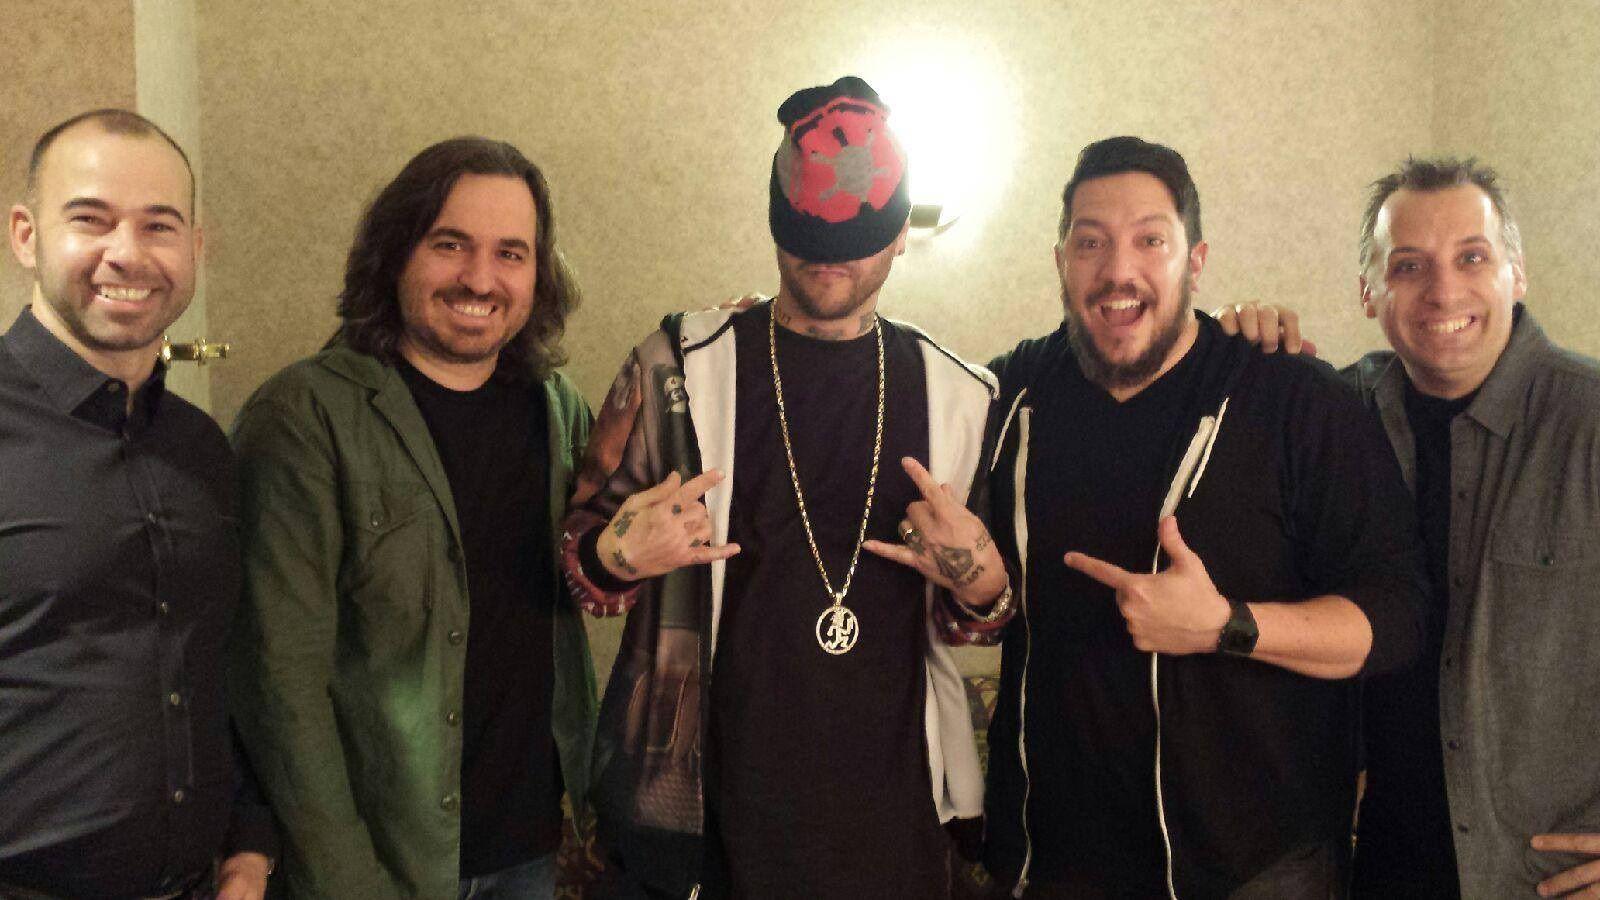 Shaggy 2 Dope was clowning around with The Impractical Jokers